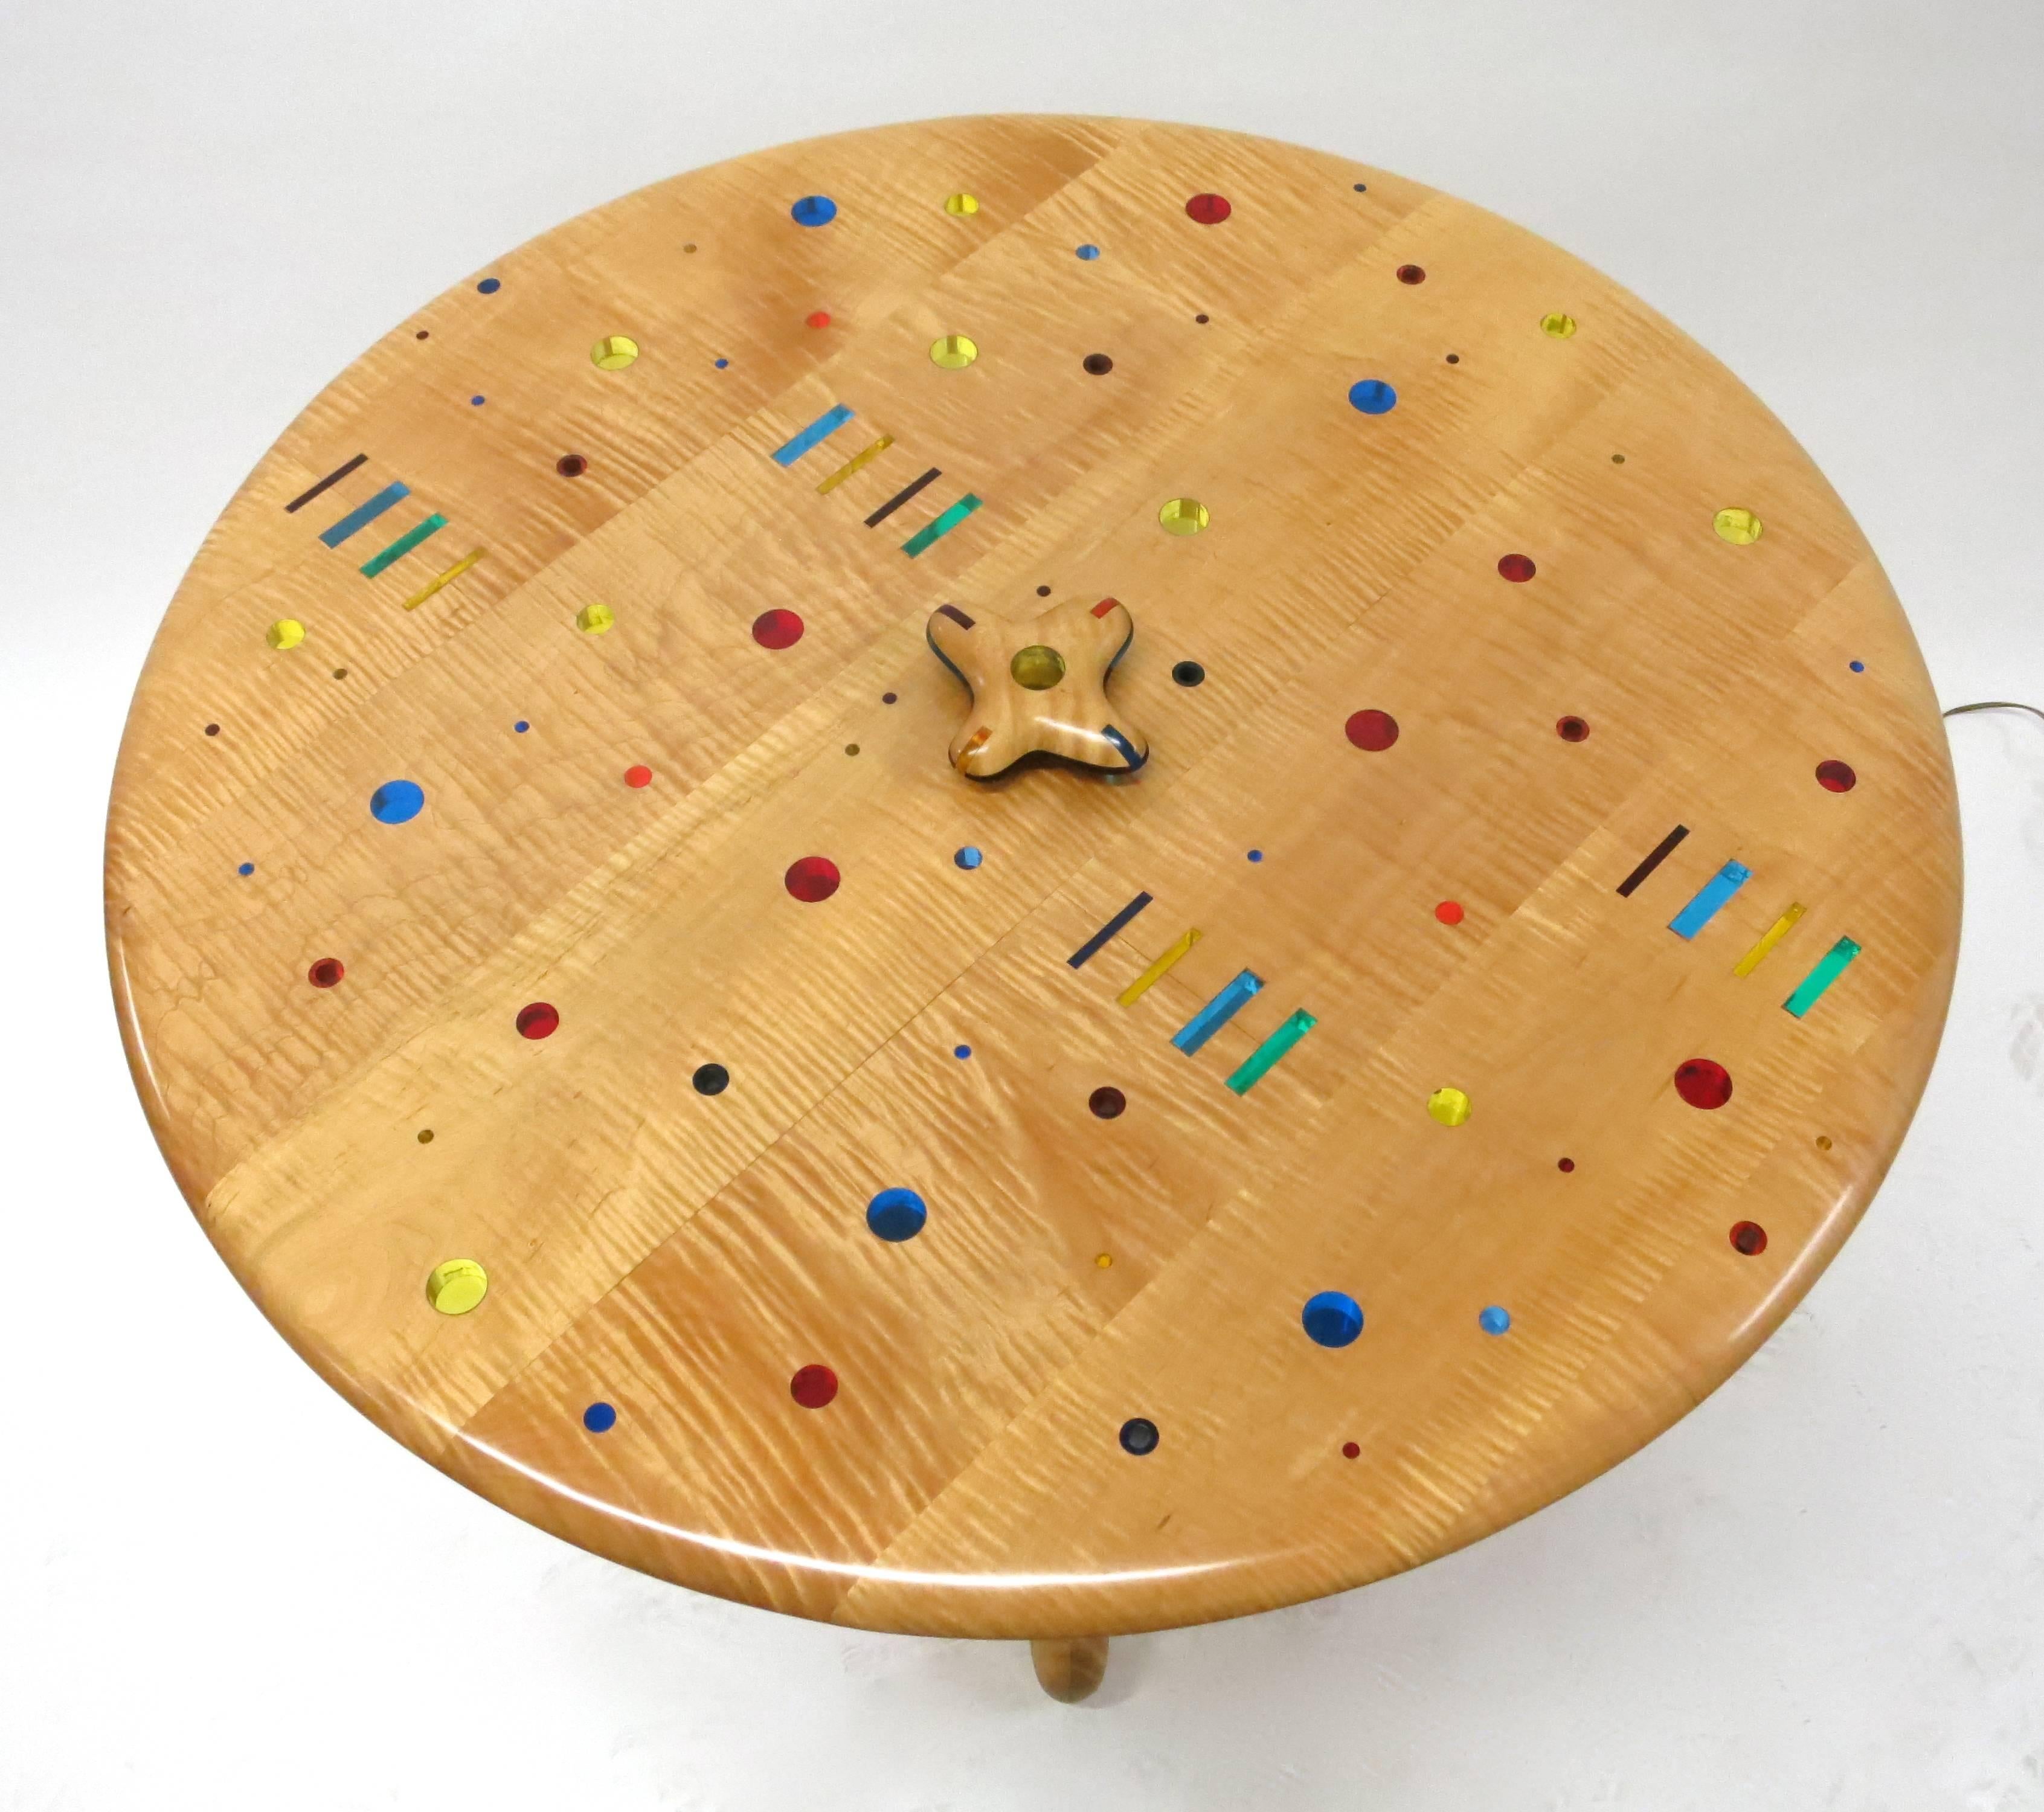 American Unique, Single Commission Dining or Center Table By Daniel Peters 1999